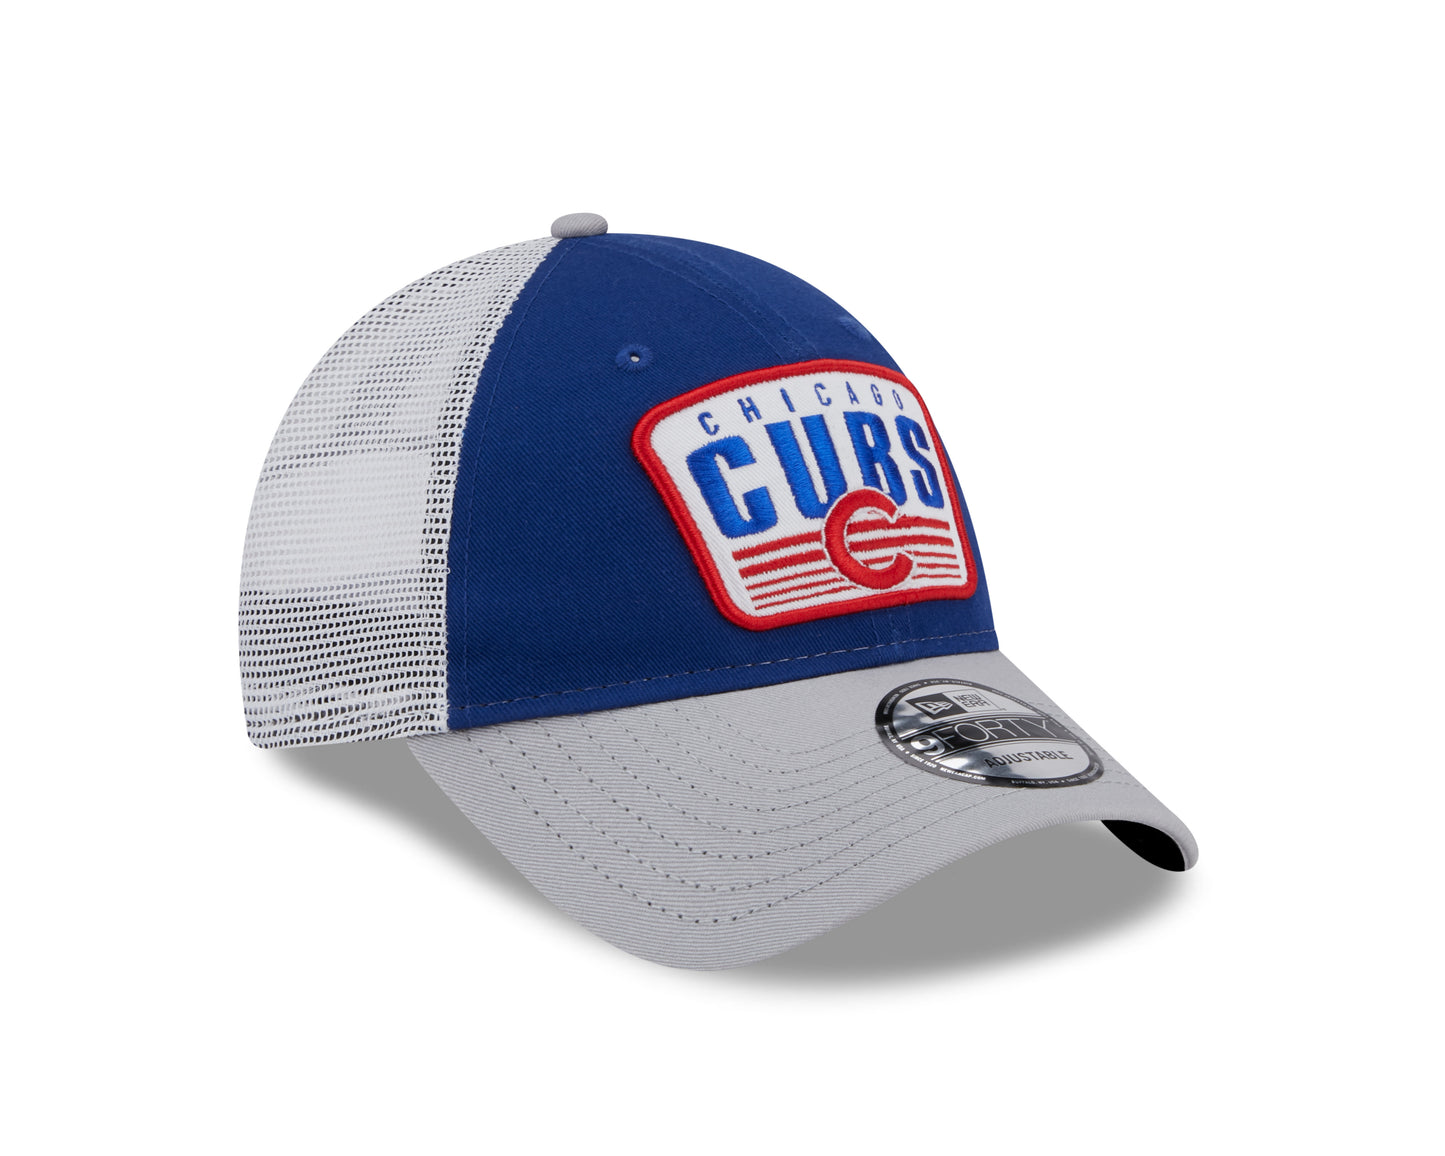 Chicago Cubs New Era 2 Tone Royal/Gray Patch Trucker 9FORTY Adjustable Hat